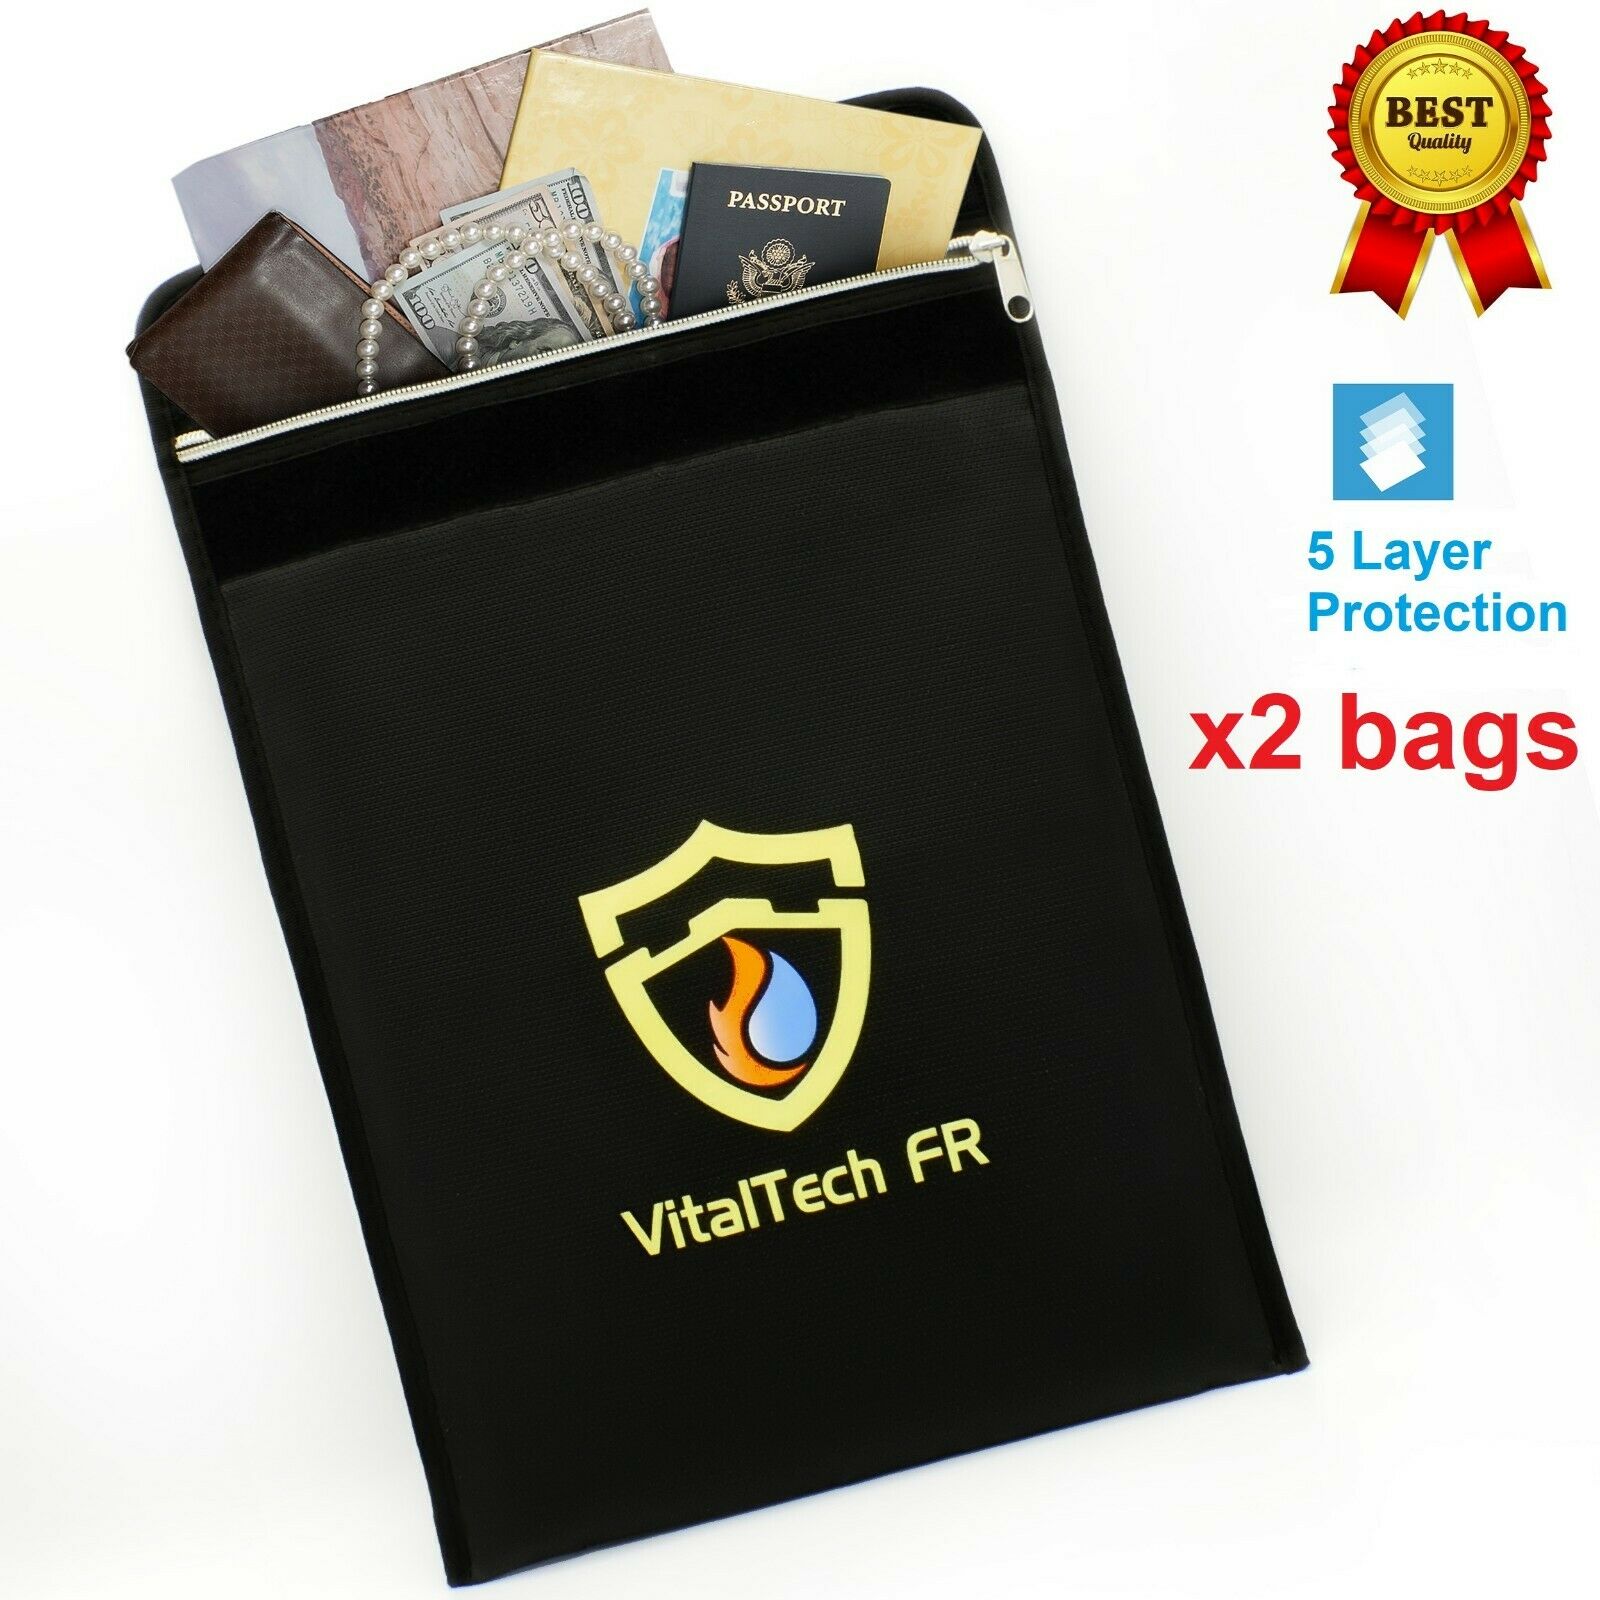 2 Vitaltech Fr Fireproof Bags 2000°f Document Safe Storage Water Resistant 15x11